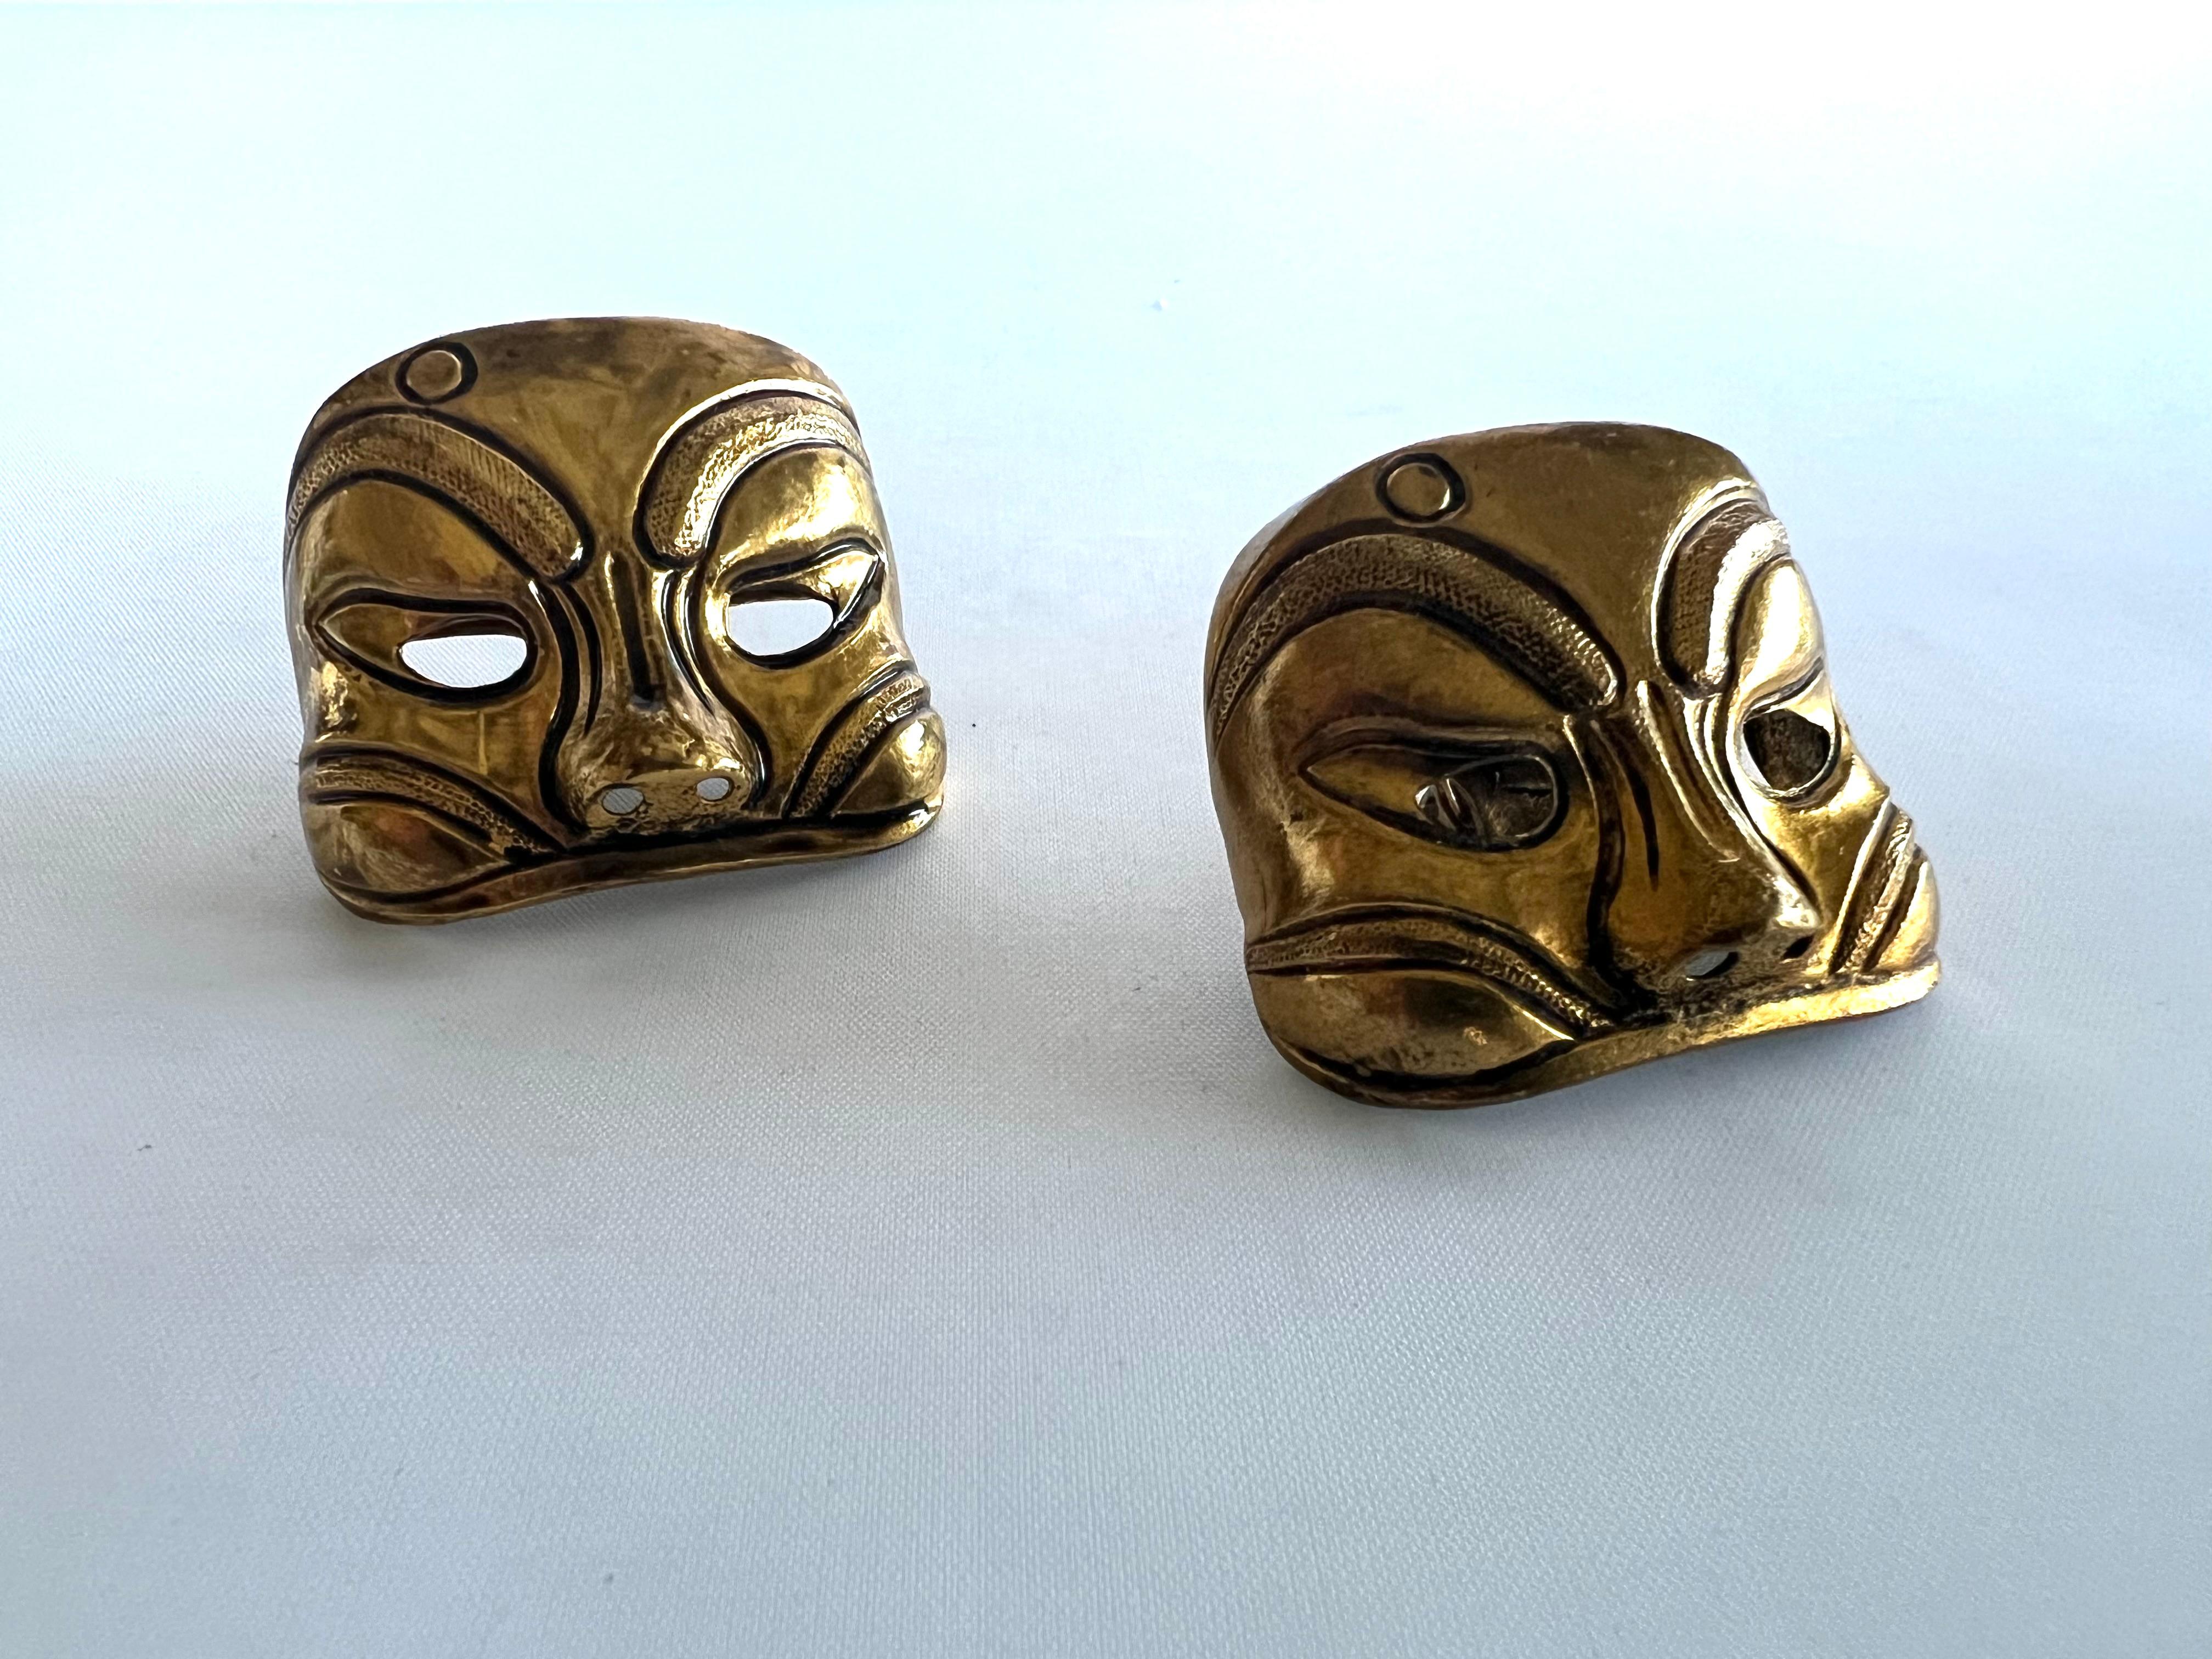 Vintage Isabel Canovas Gilt Mask Earrings In Excellent Condition For Sale In Palm Springs, CA